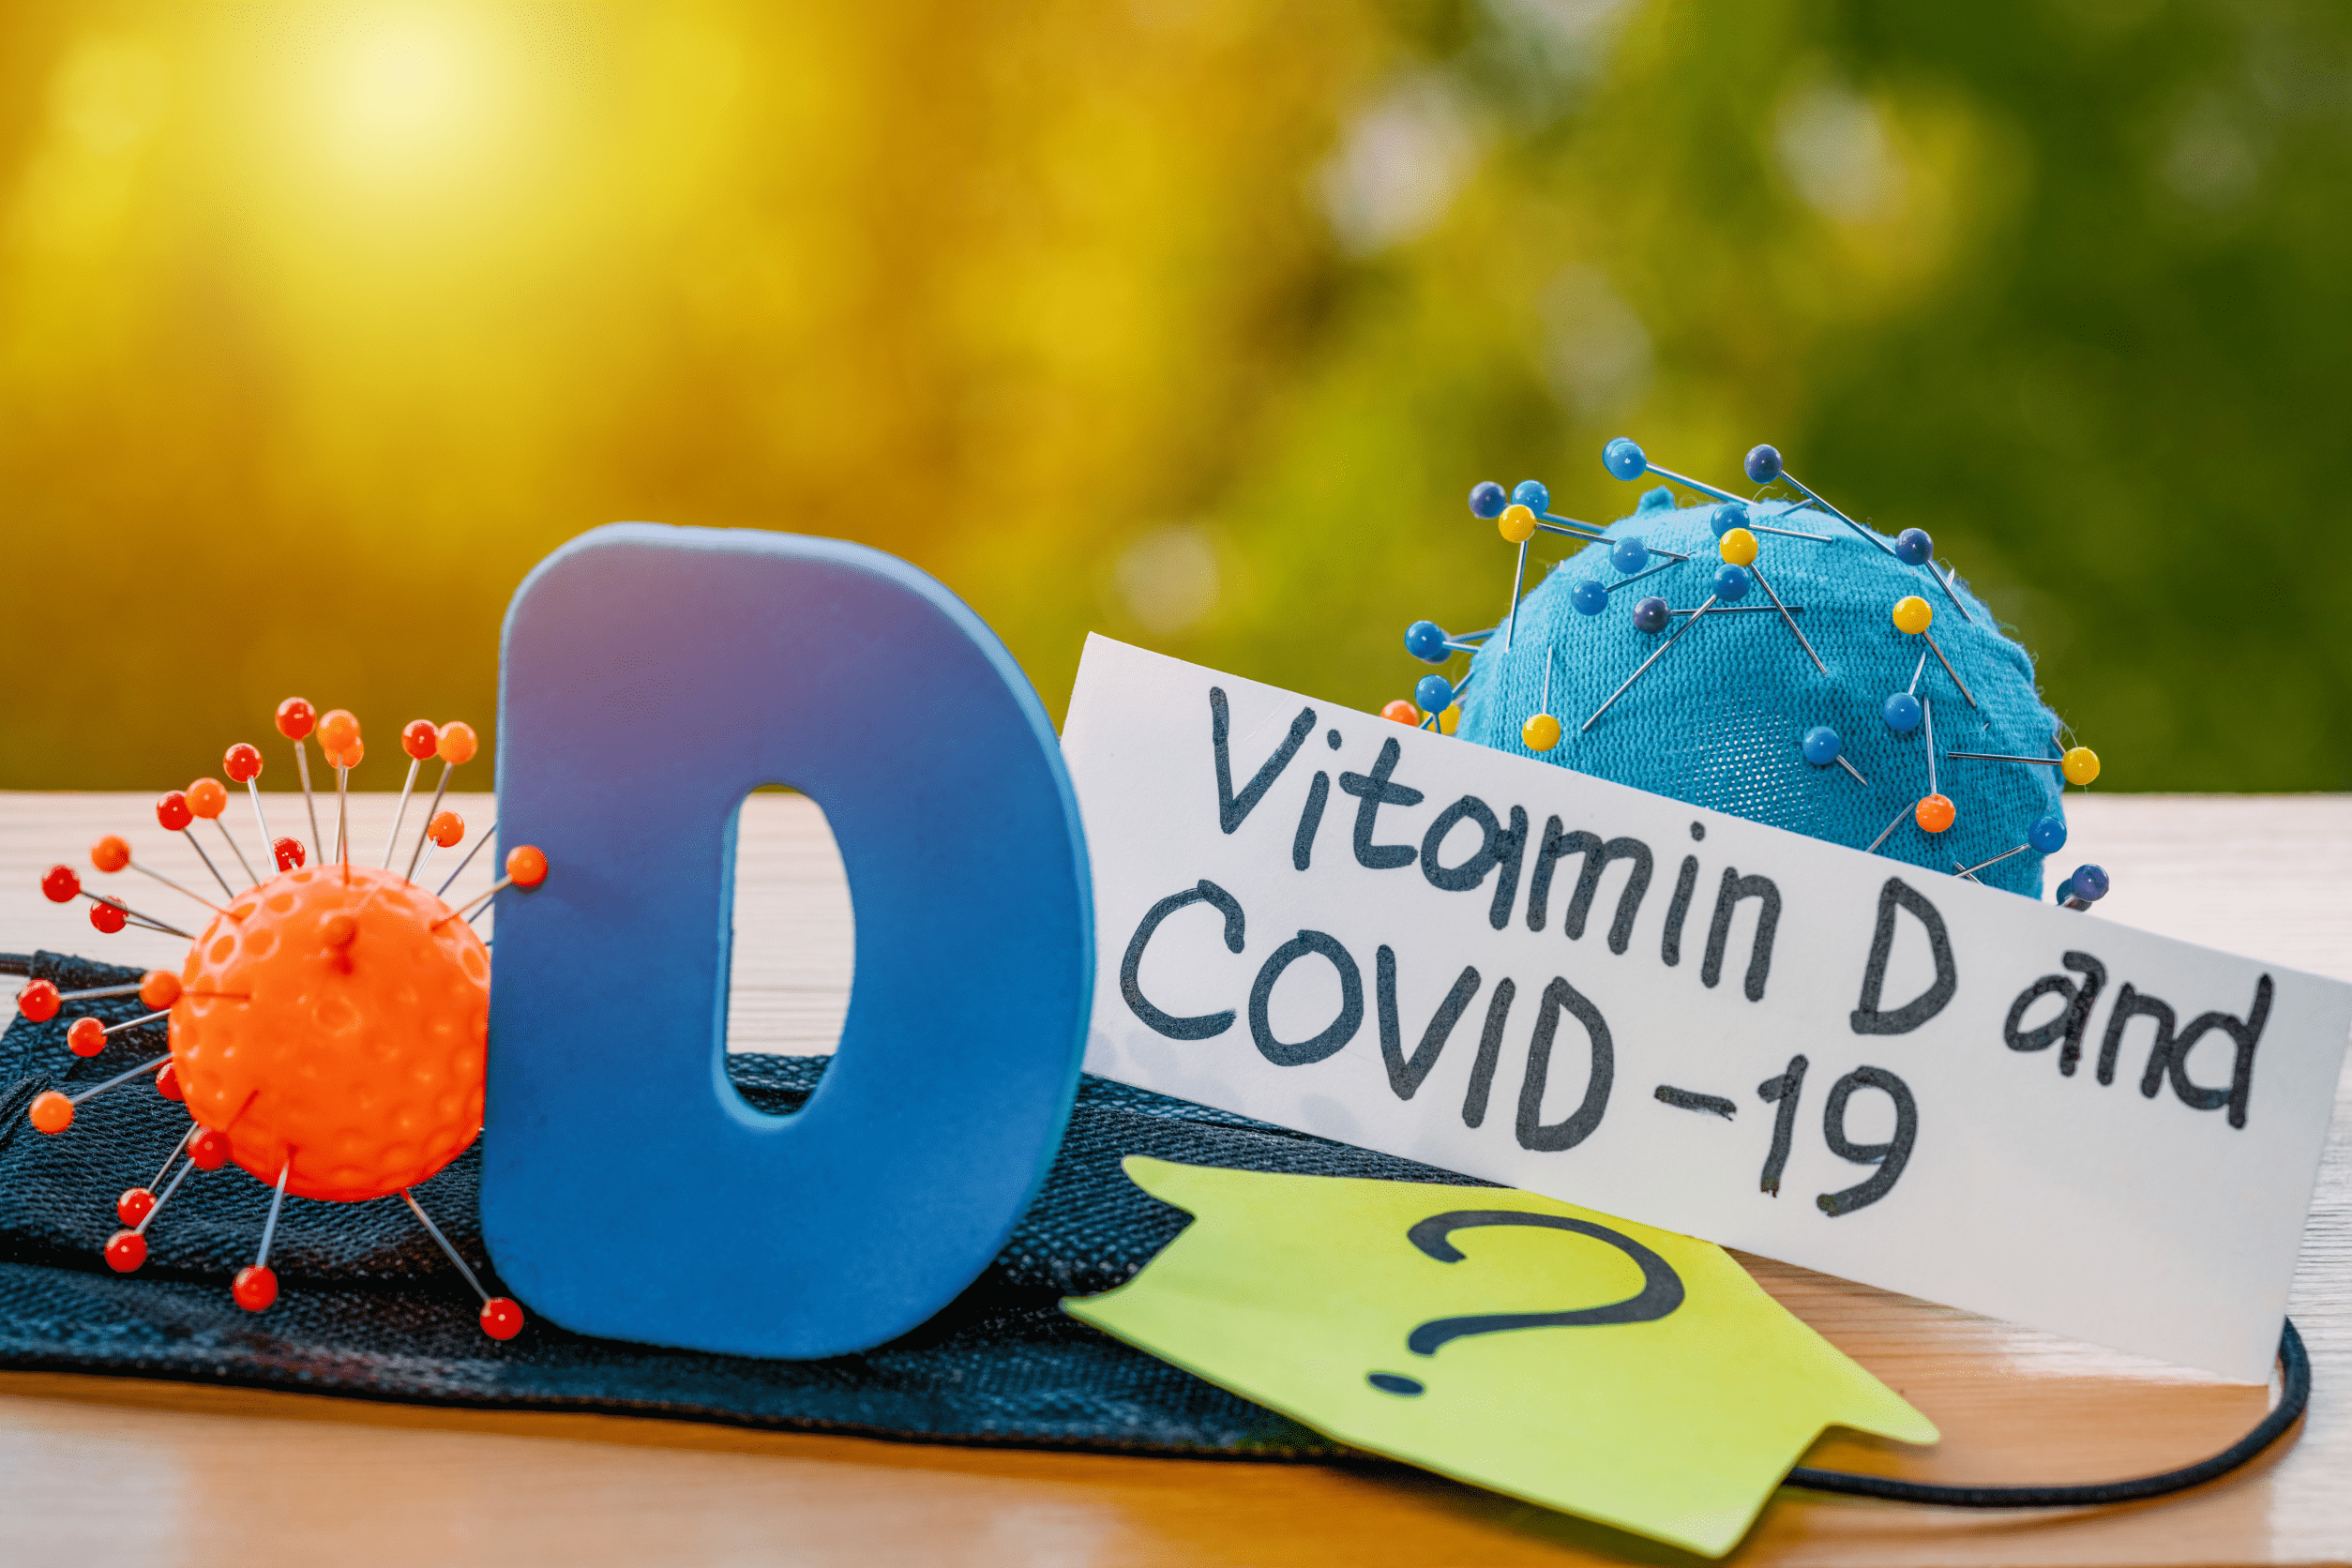 Rich results on Google’s SERP when searching for ‘Vitamin D and COVID-19'